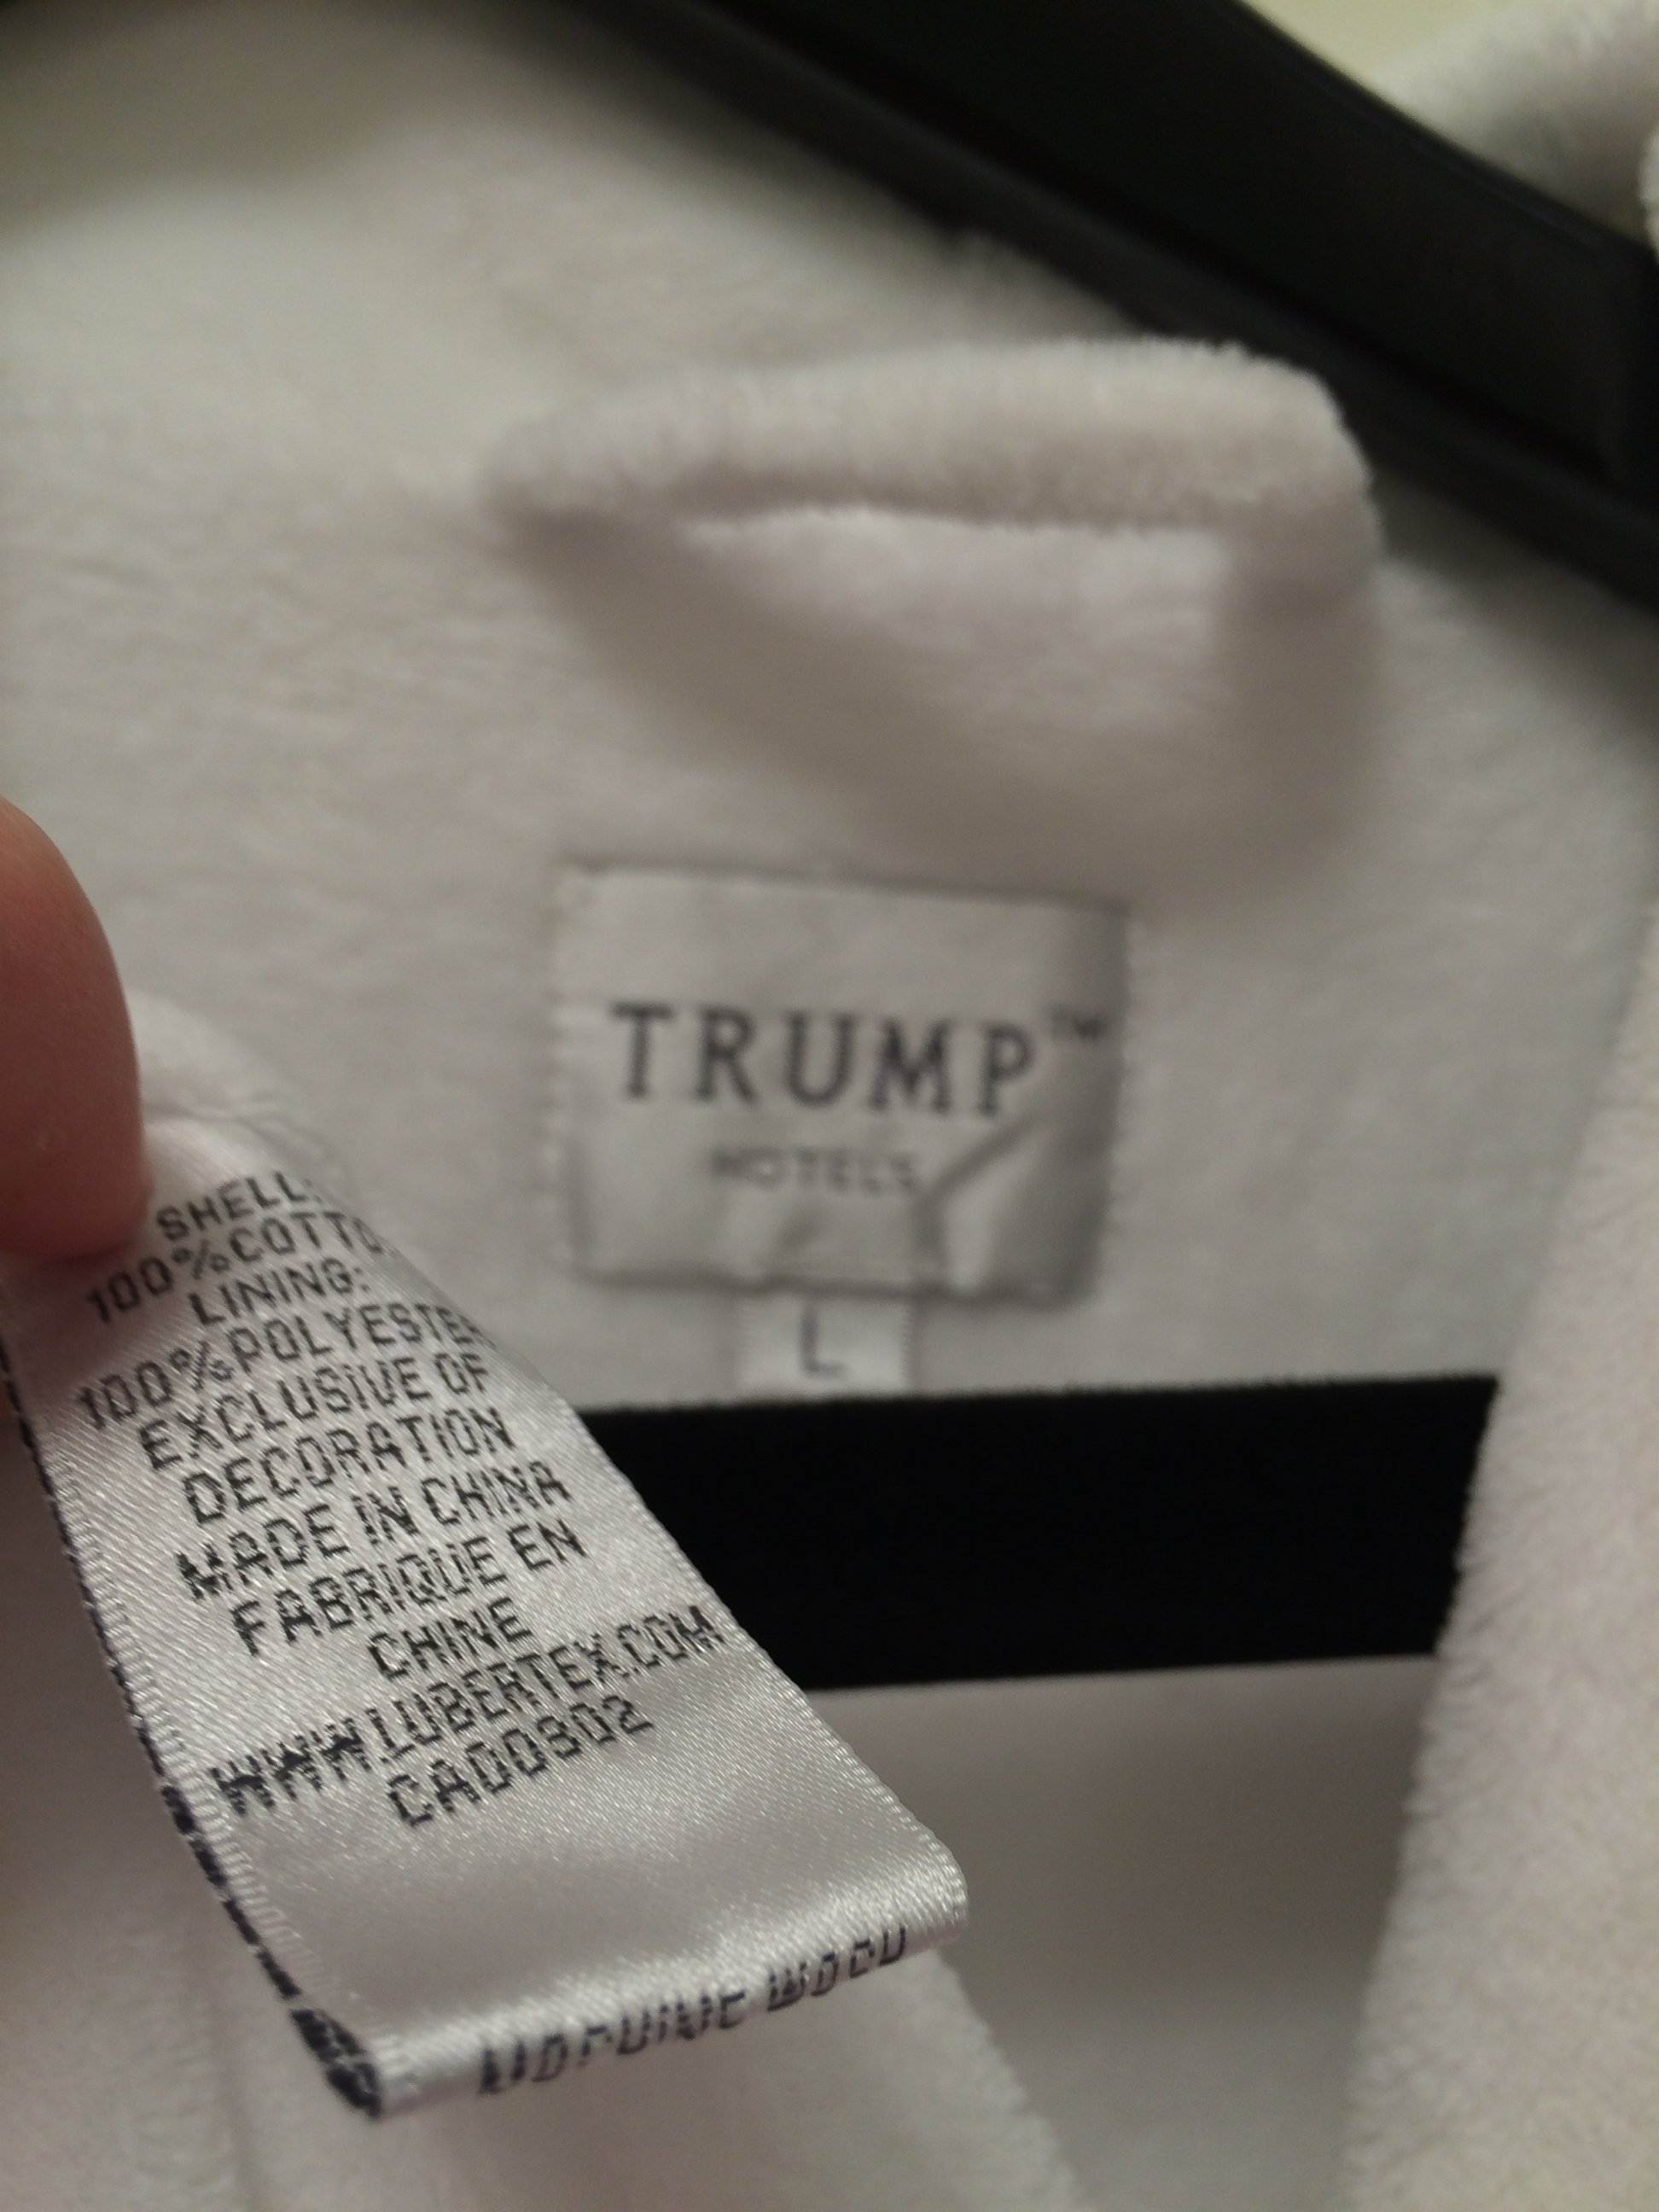 PHOTO: The 'Trump Hotels' bathrobe was made in China.